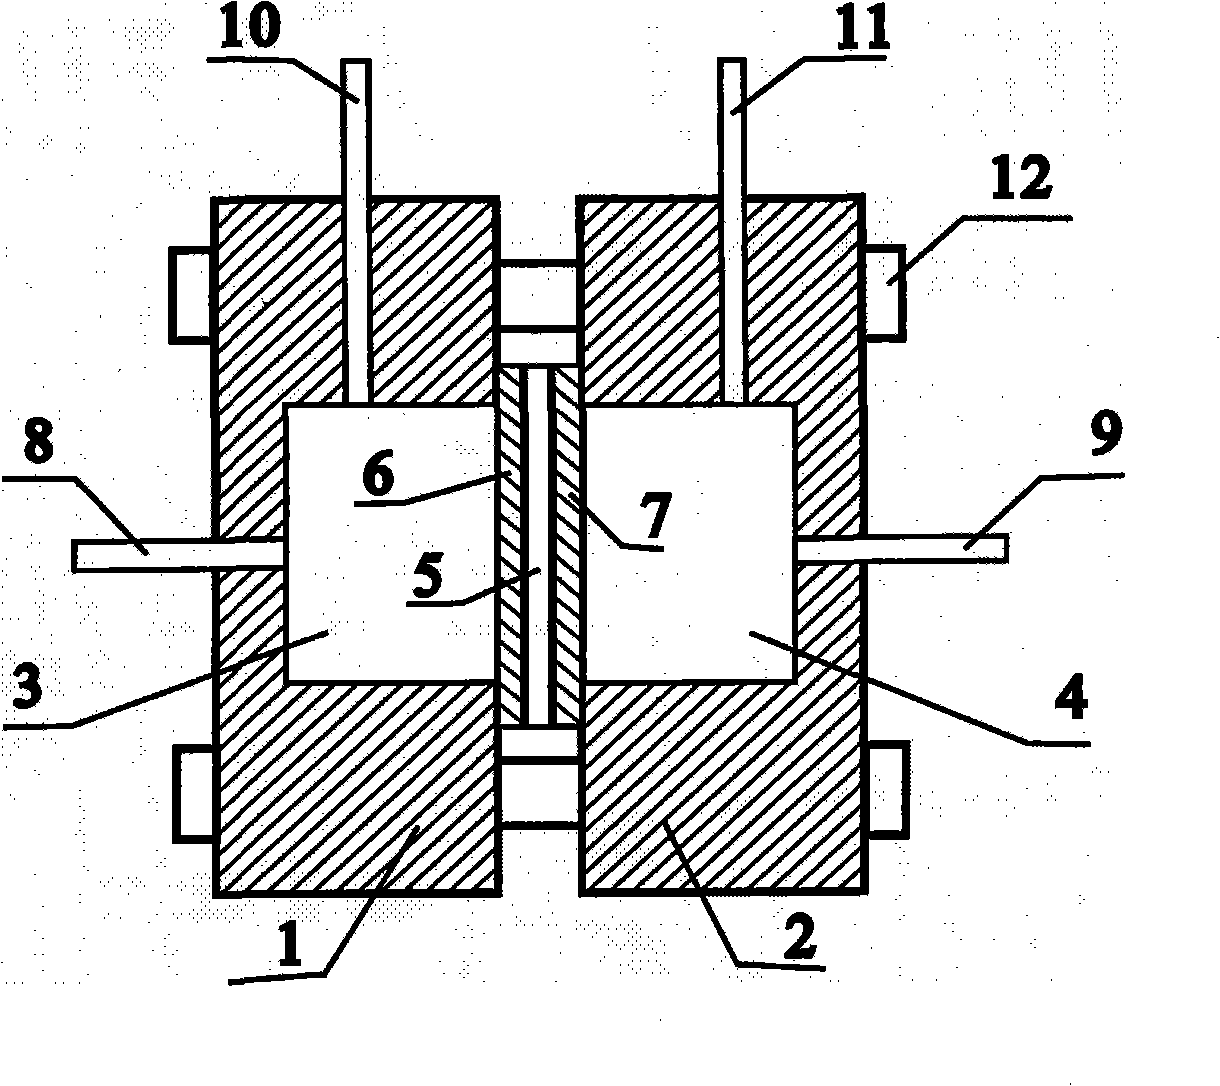 Microfluid drive unit based on infiltration